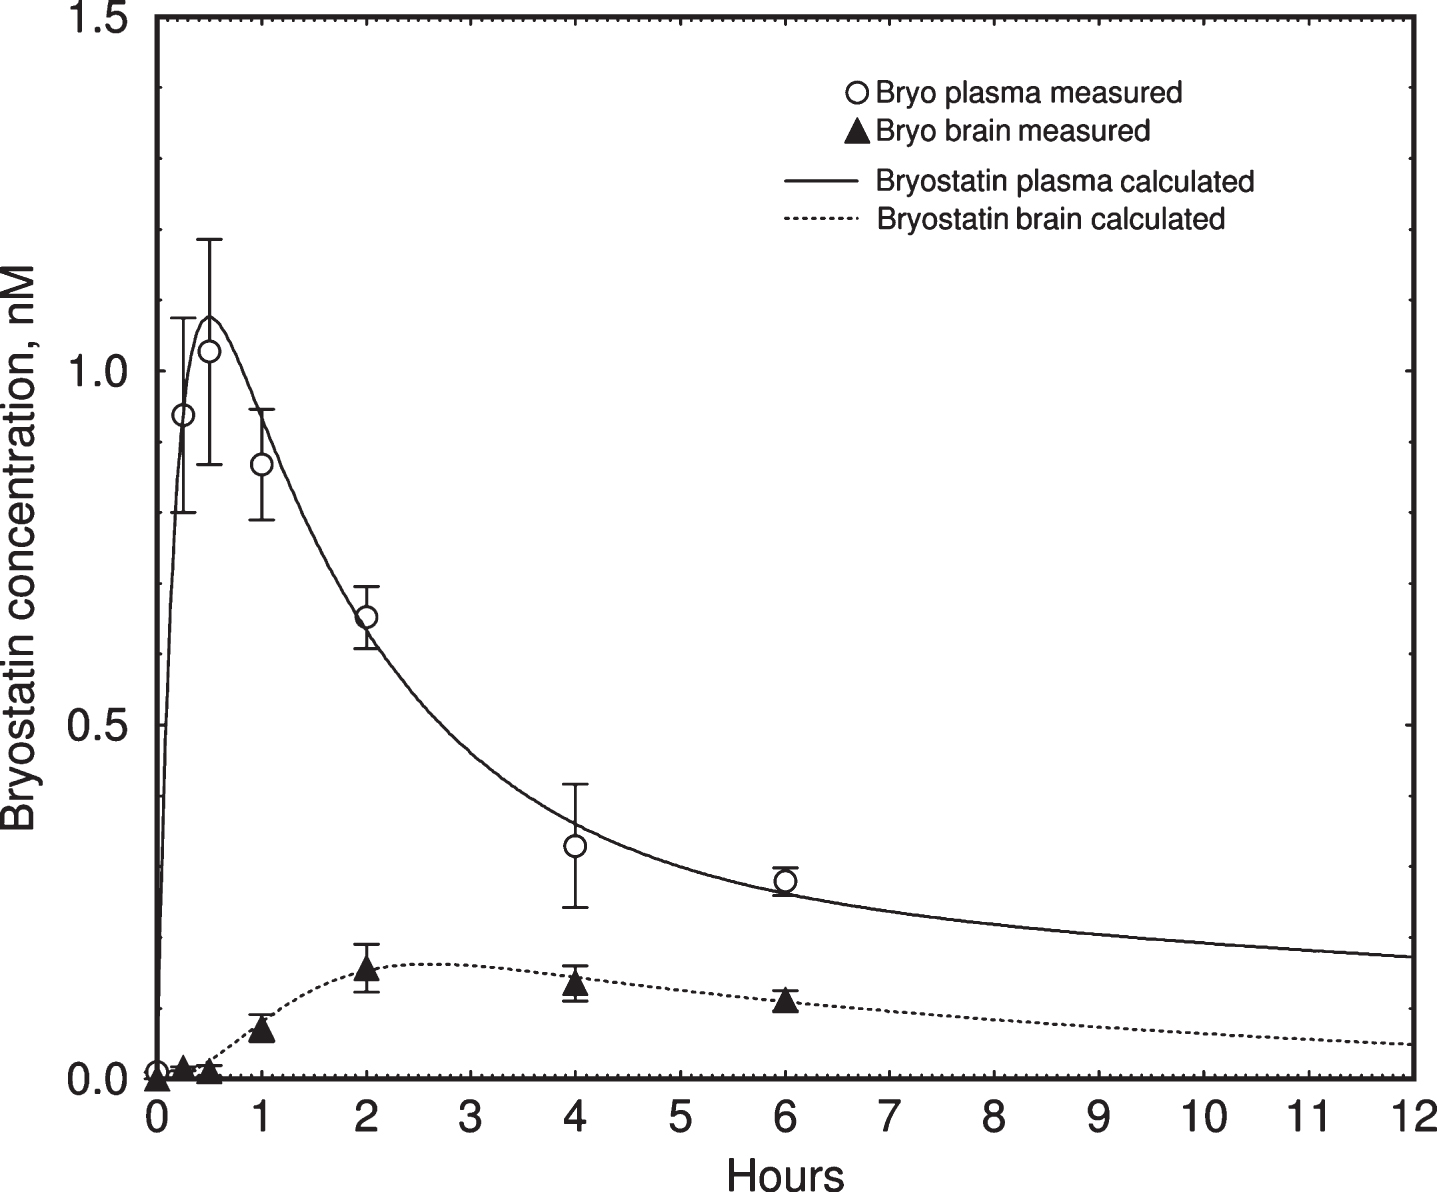 Pharmacokinetic simulation of bryostatin 1 blood plasma concentration in mouse. Upper curve = blood plasma. Lower curve = brain. Values are mean±SEM, n = 3–6 mice per group. The lower curve was fitted to measured values using a simple saturable brain uptake model using parameters of Vmuptake = 0.017 nM min–1, Kmuptake = 1.5 nM, and rate constant of elimination = 0.027 min–1.